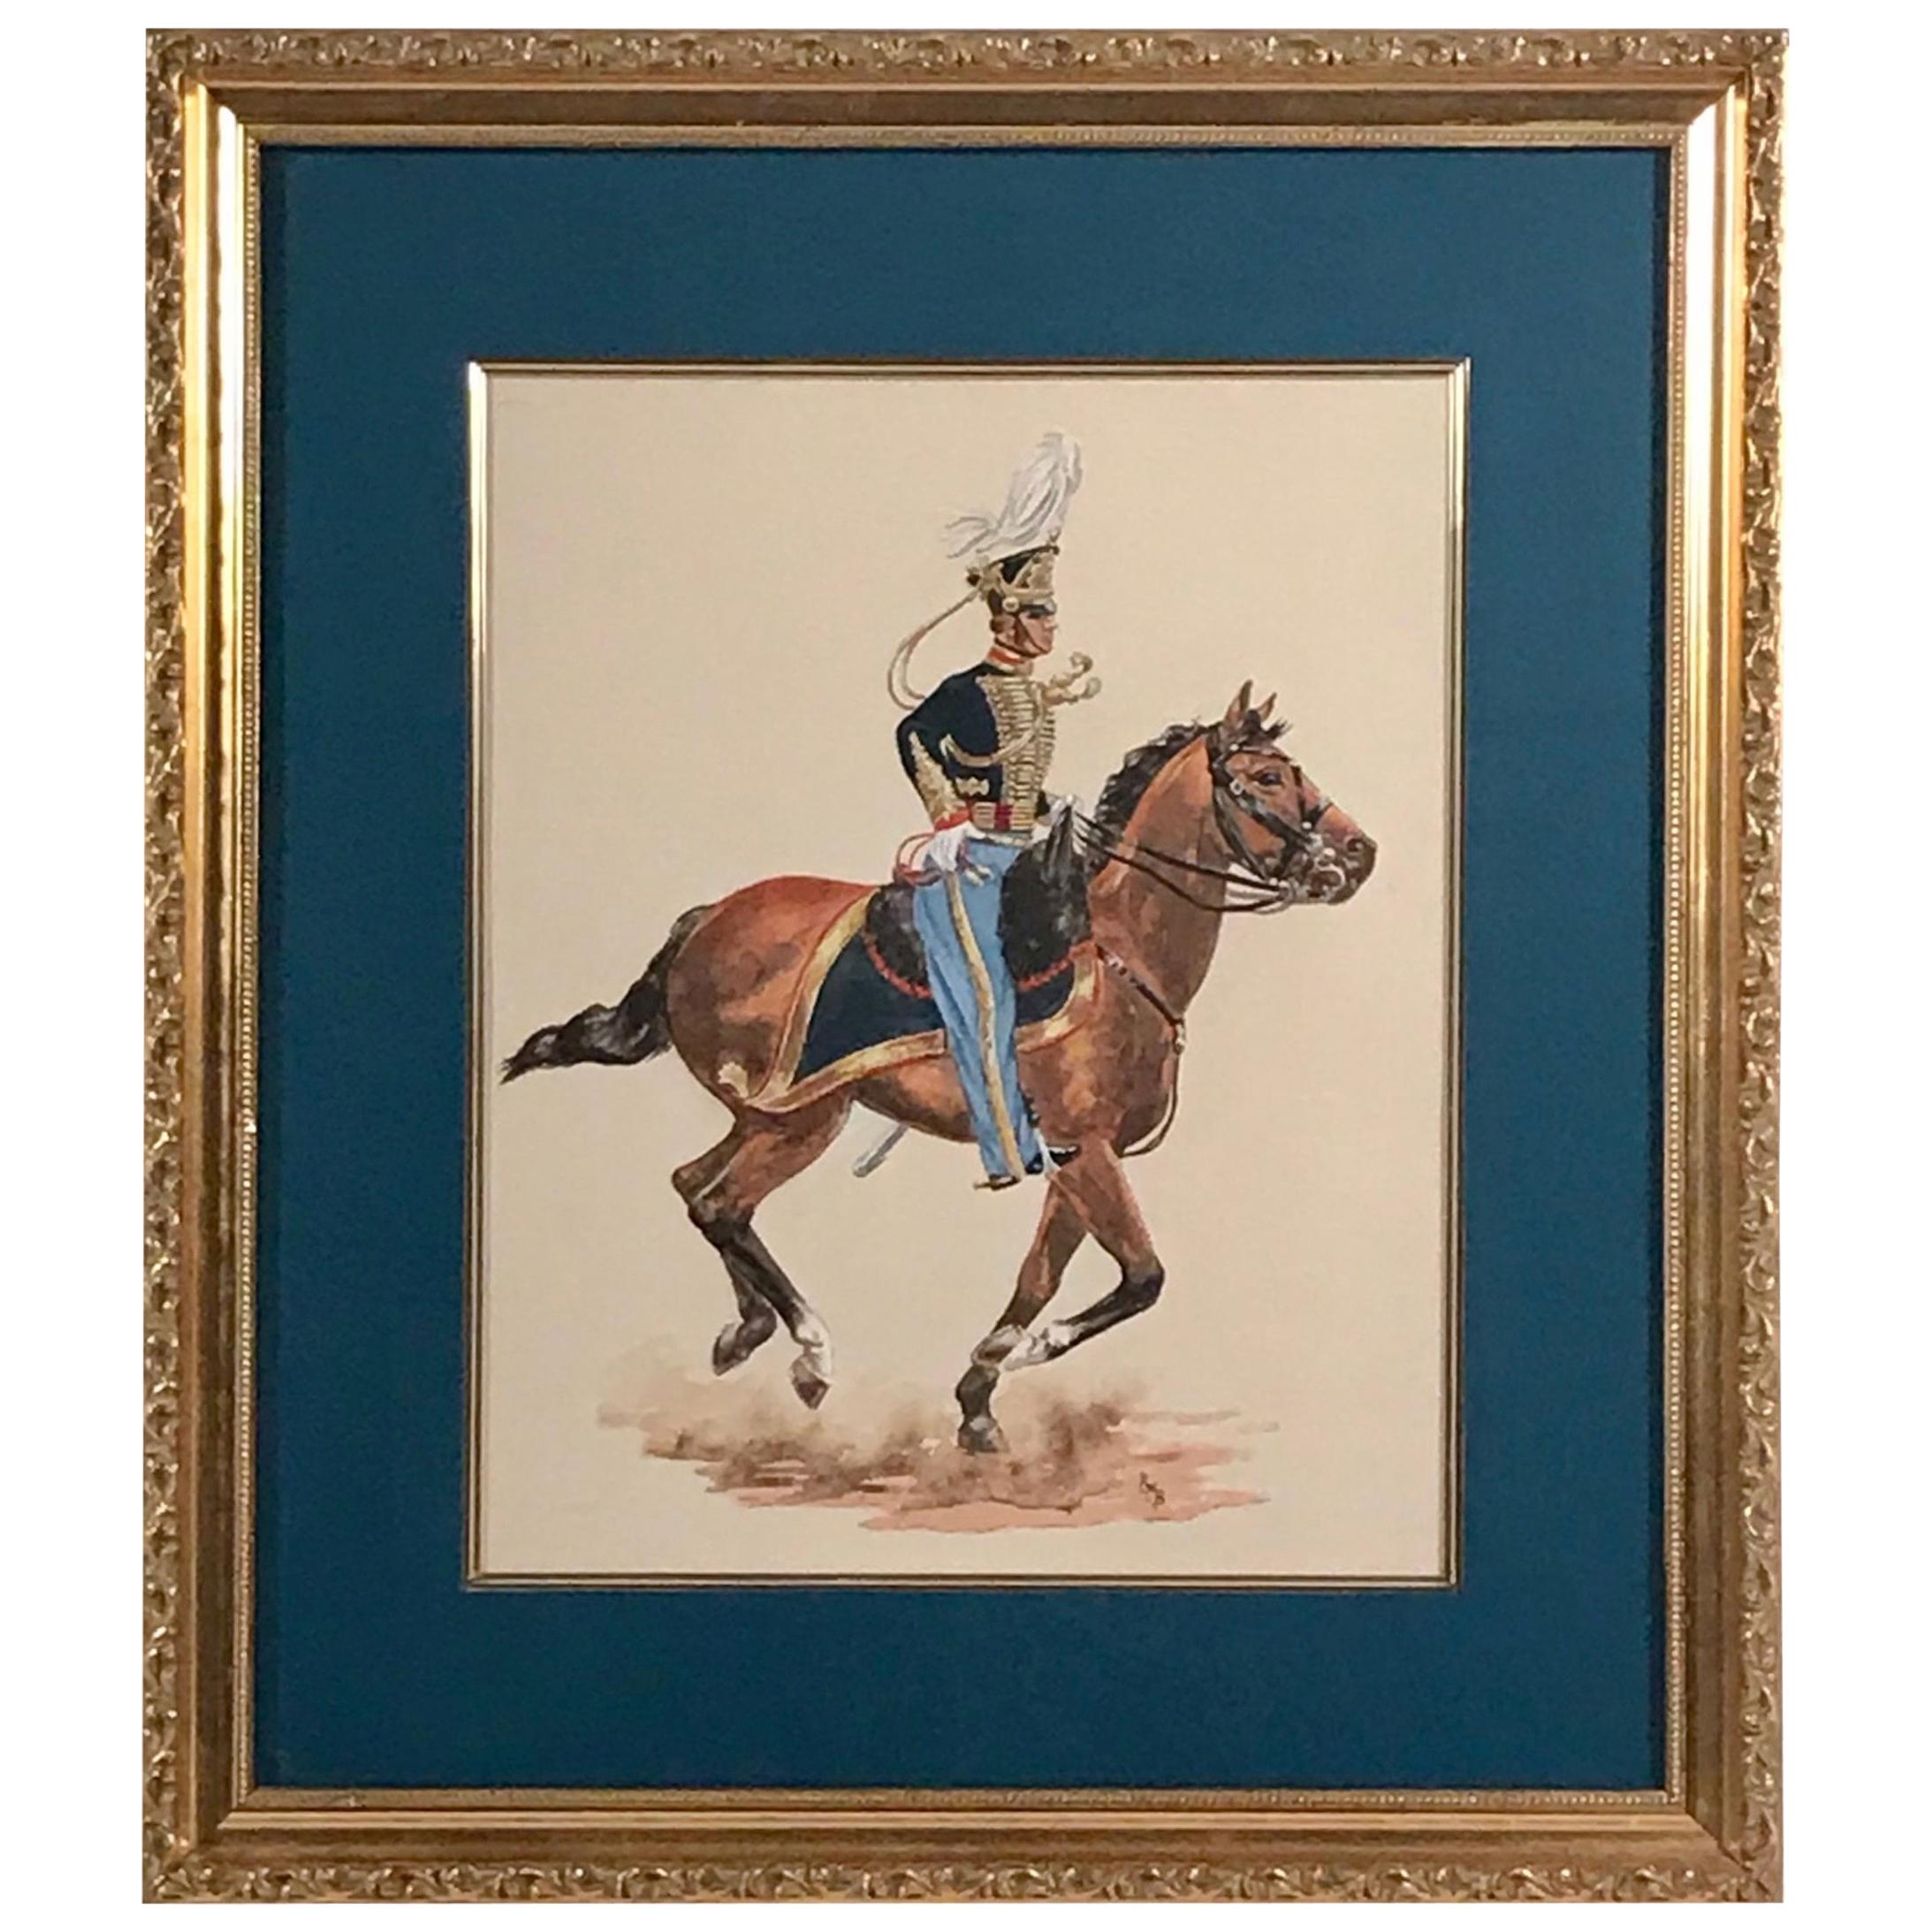 Watercolor Painting of Cavalry Soldier on Galloping Horse, Monogramed